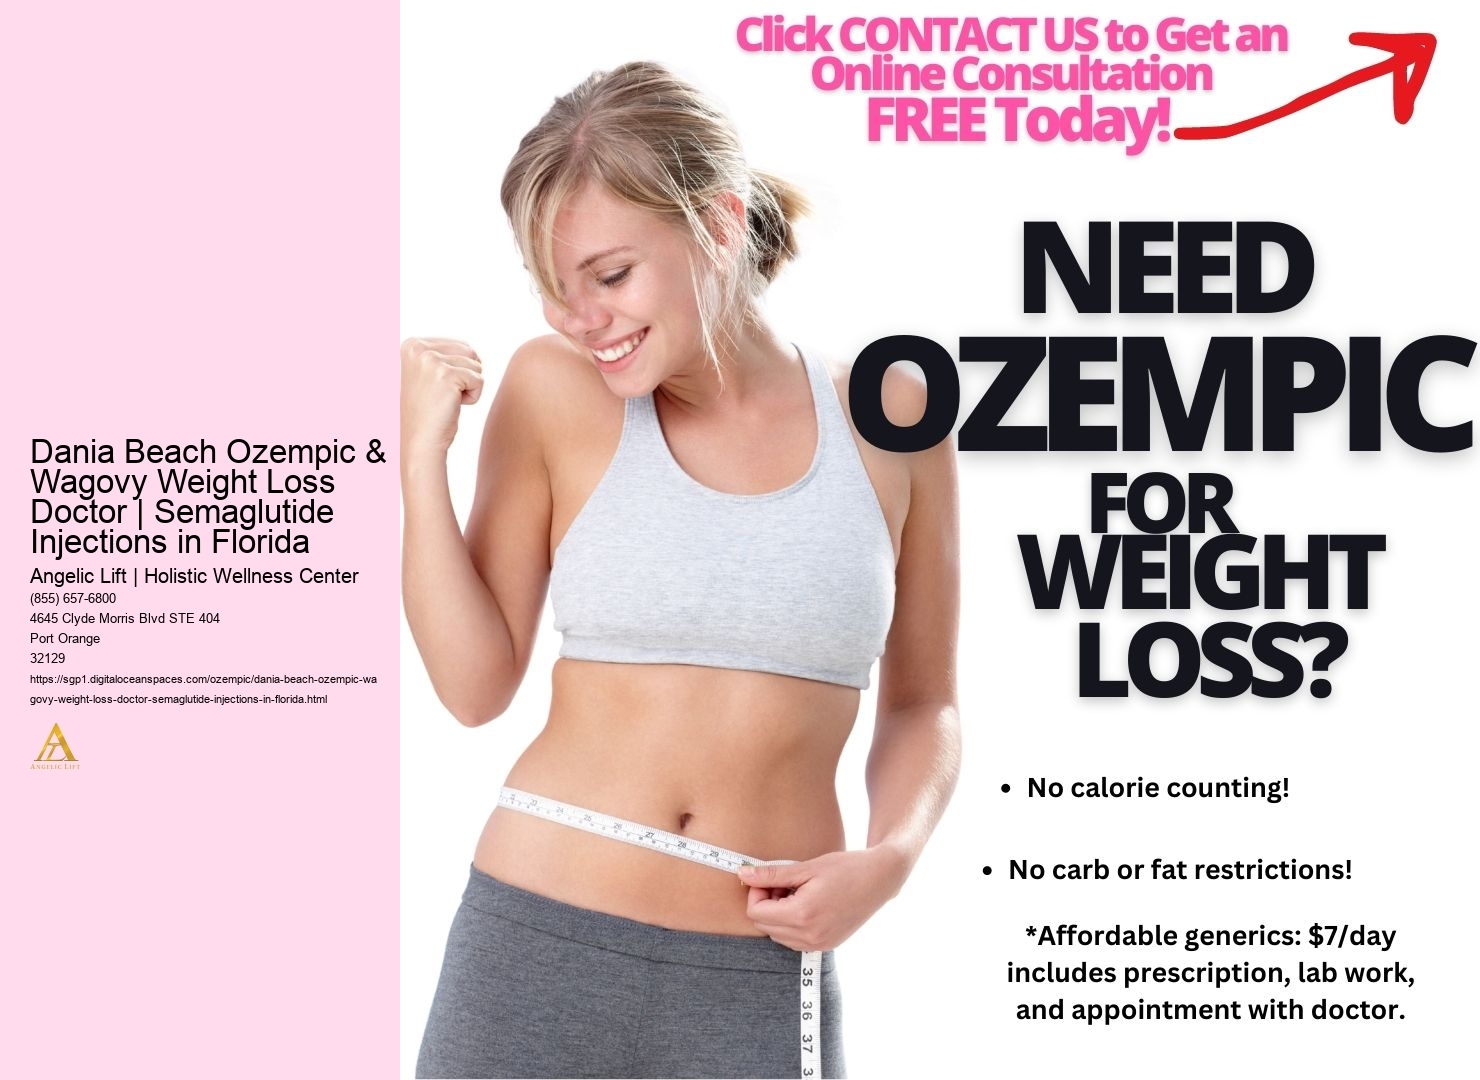 Dania Beach Ozempic & Wagovy Weight Loss Doctor | Semaglutide Injections in Florida